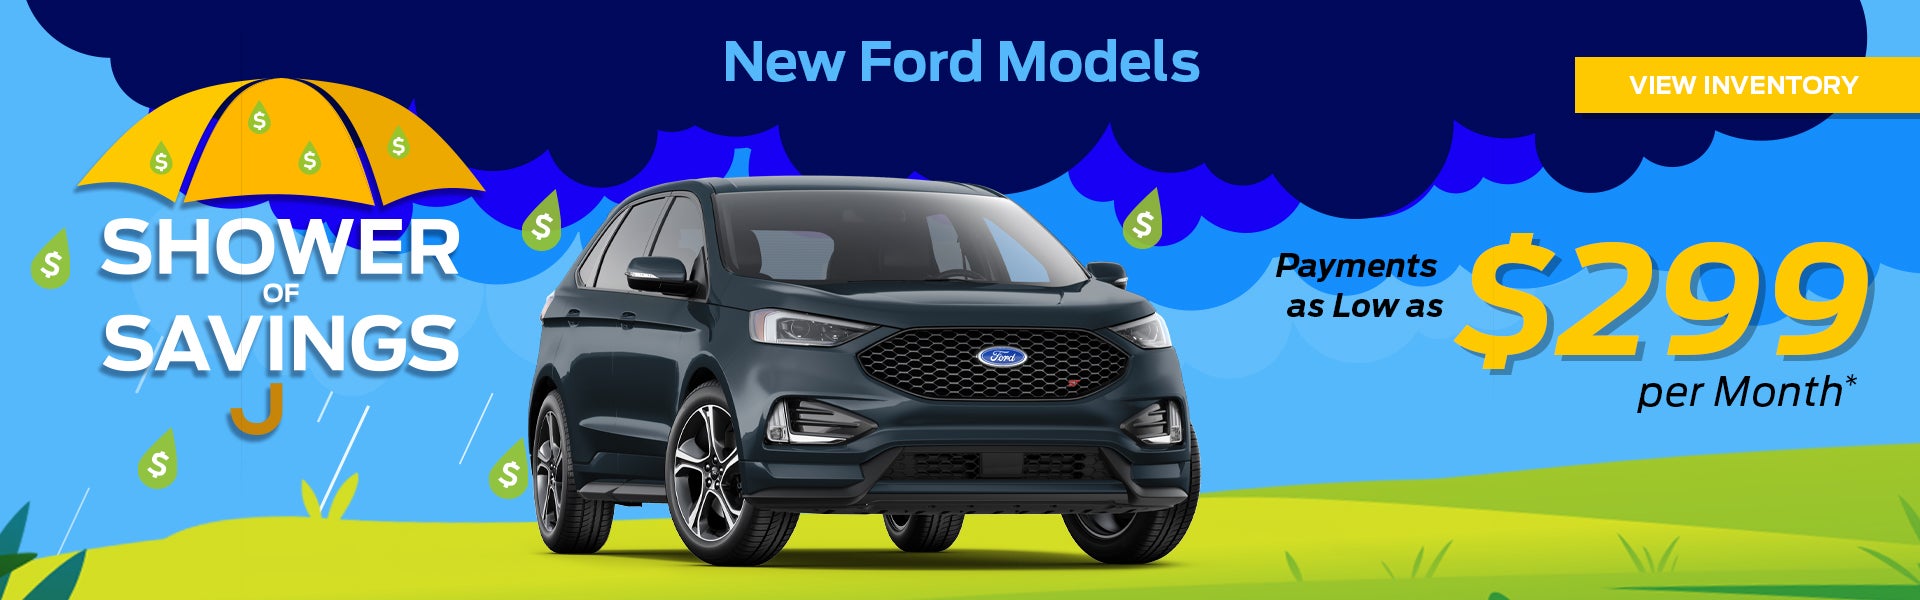 Get payments as low as $299 a month on select Ford models 